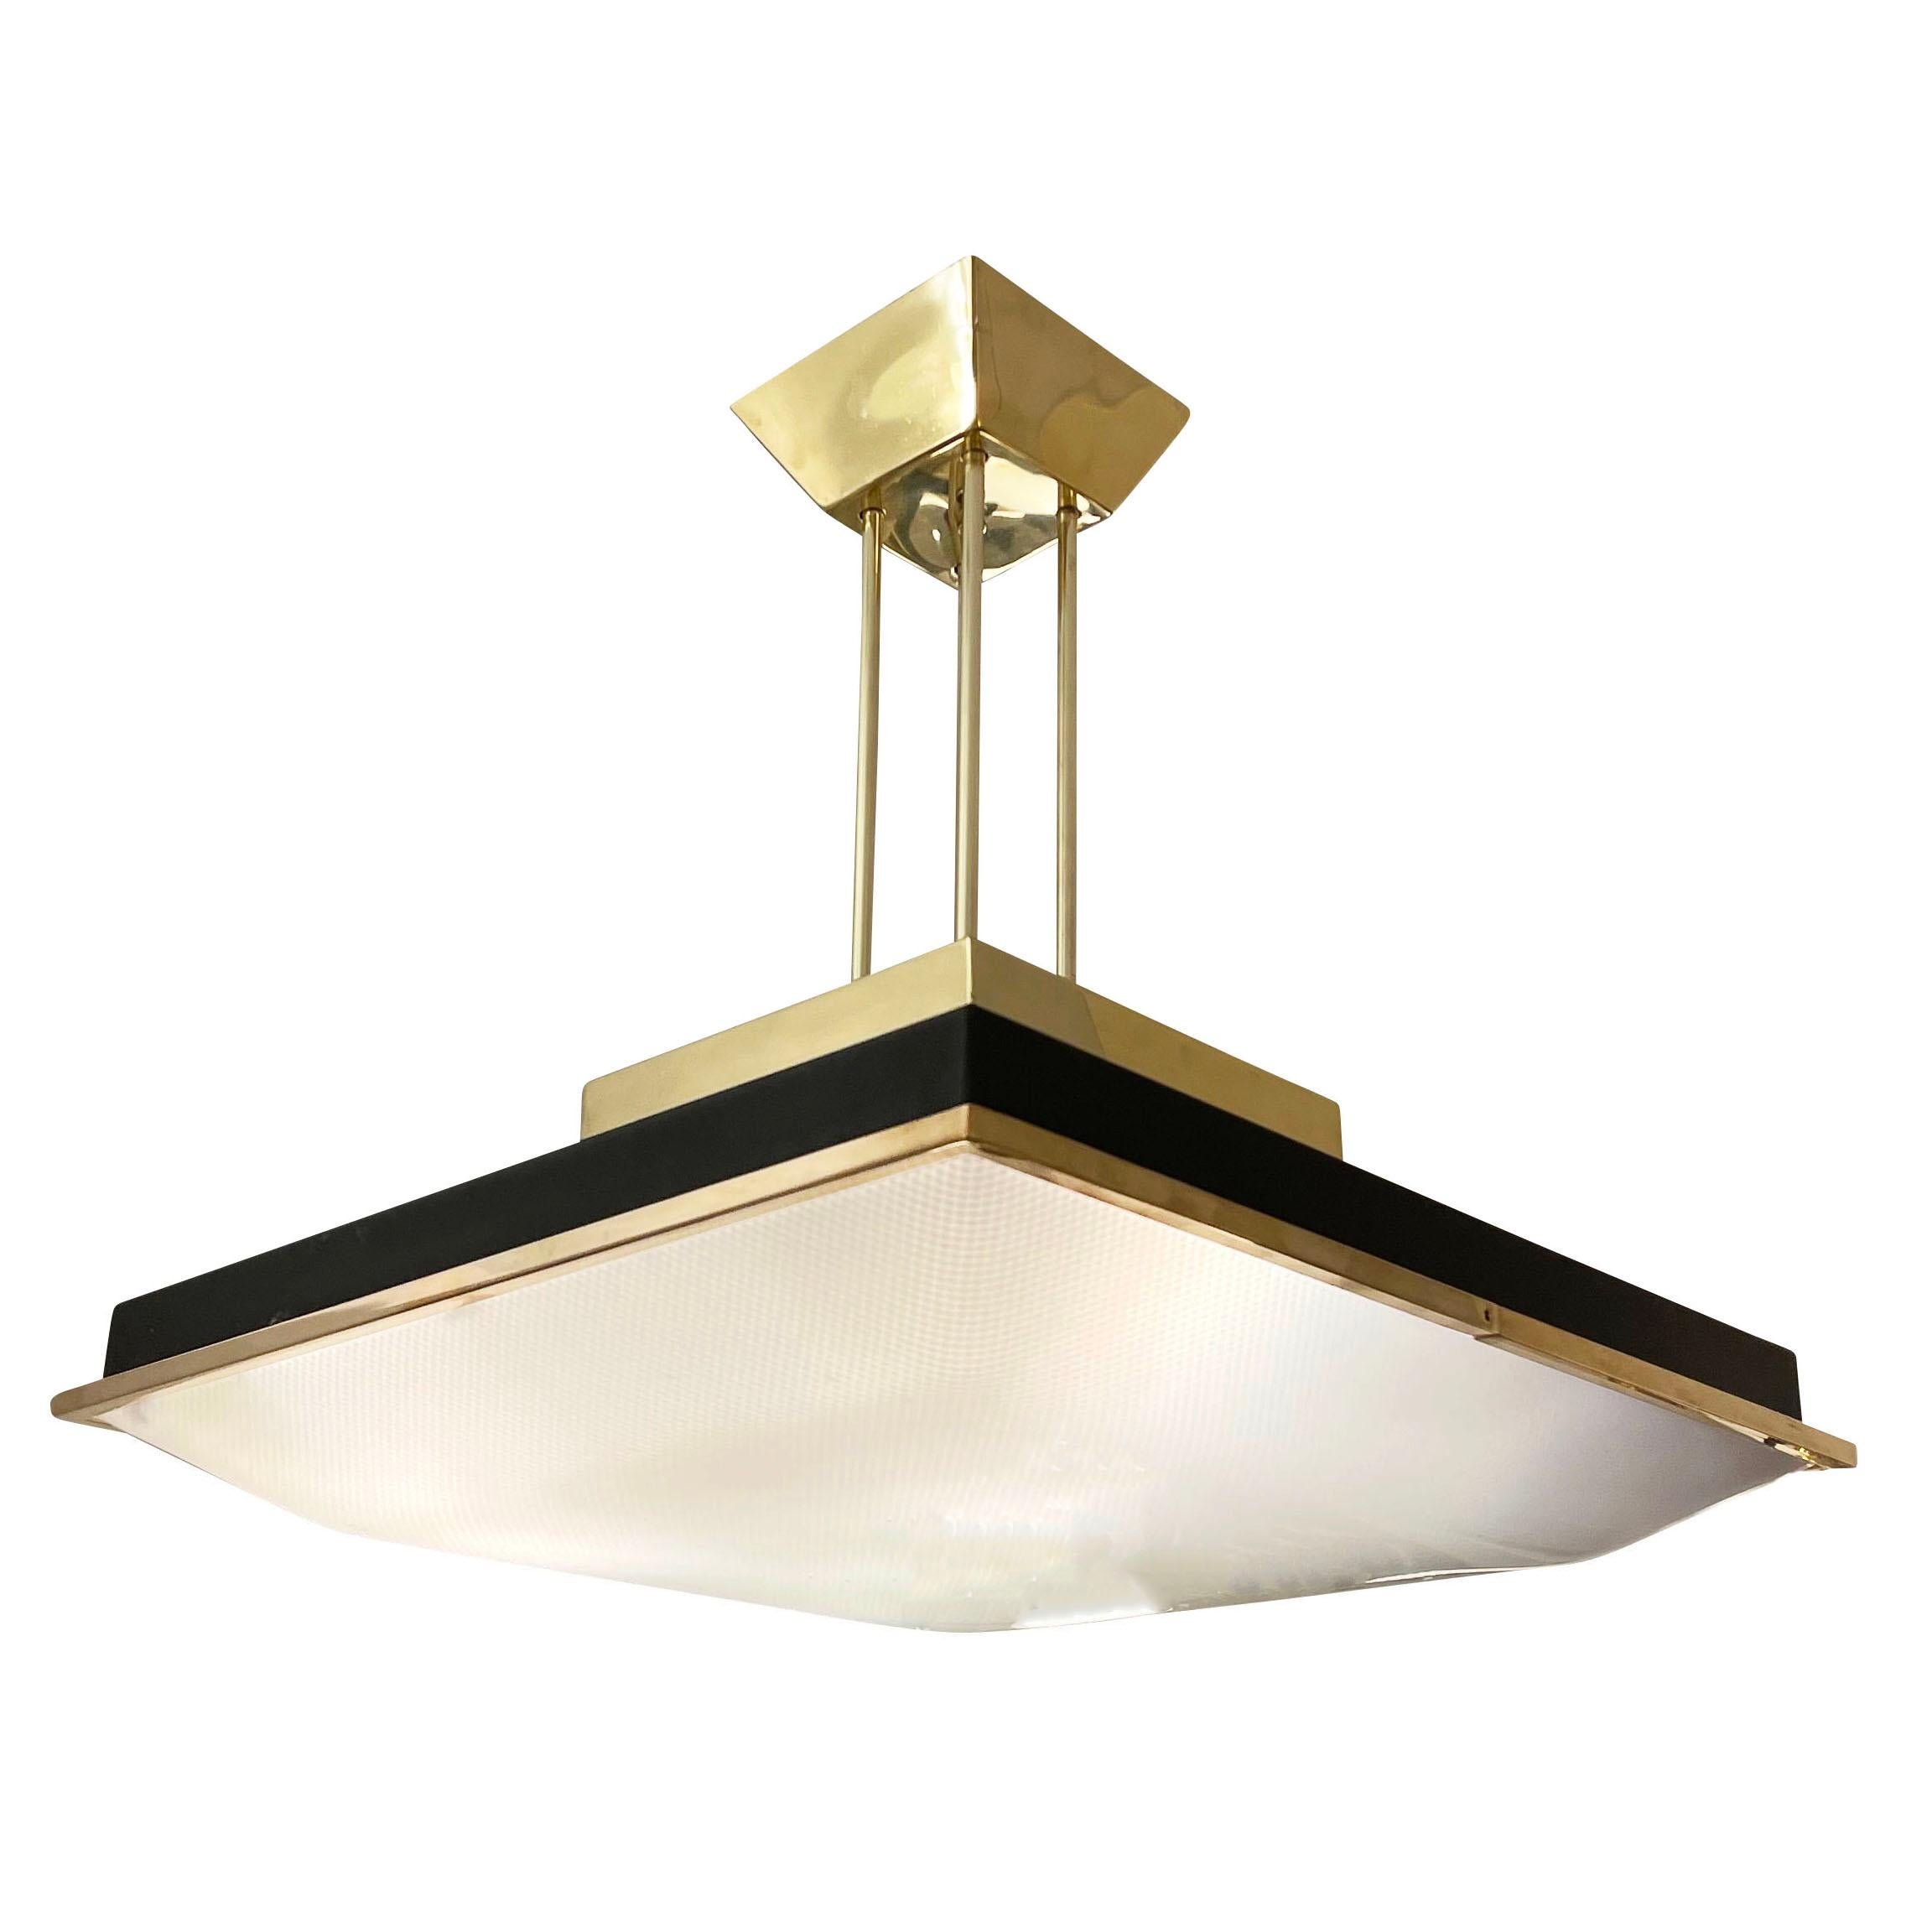 Angular mid-century Italian chandelier with a square Perspex shade. Elevating the piece are the brass rims and the canopy with its distinctive fours stems. Holds six candelabra sockets. Can also be used as a flush mount with the removal of the